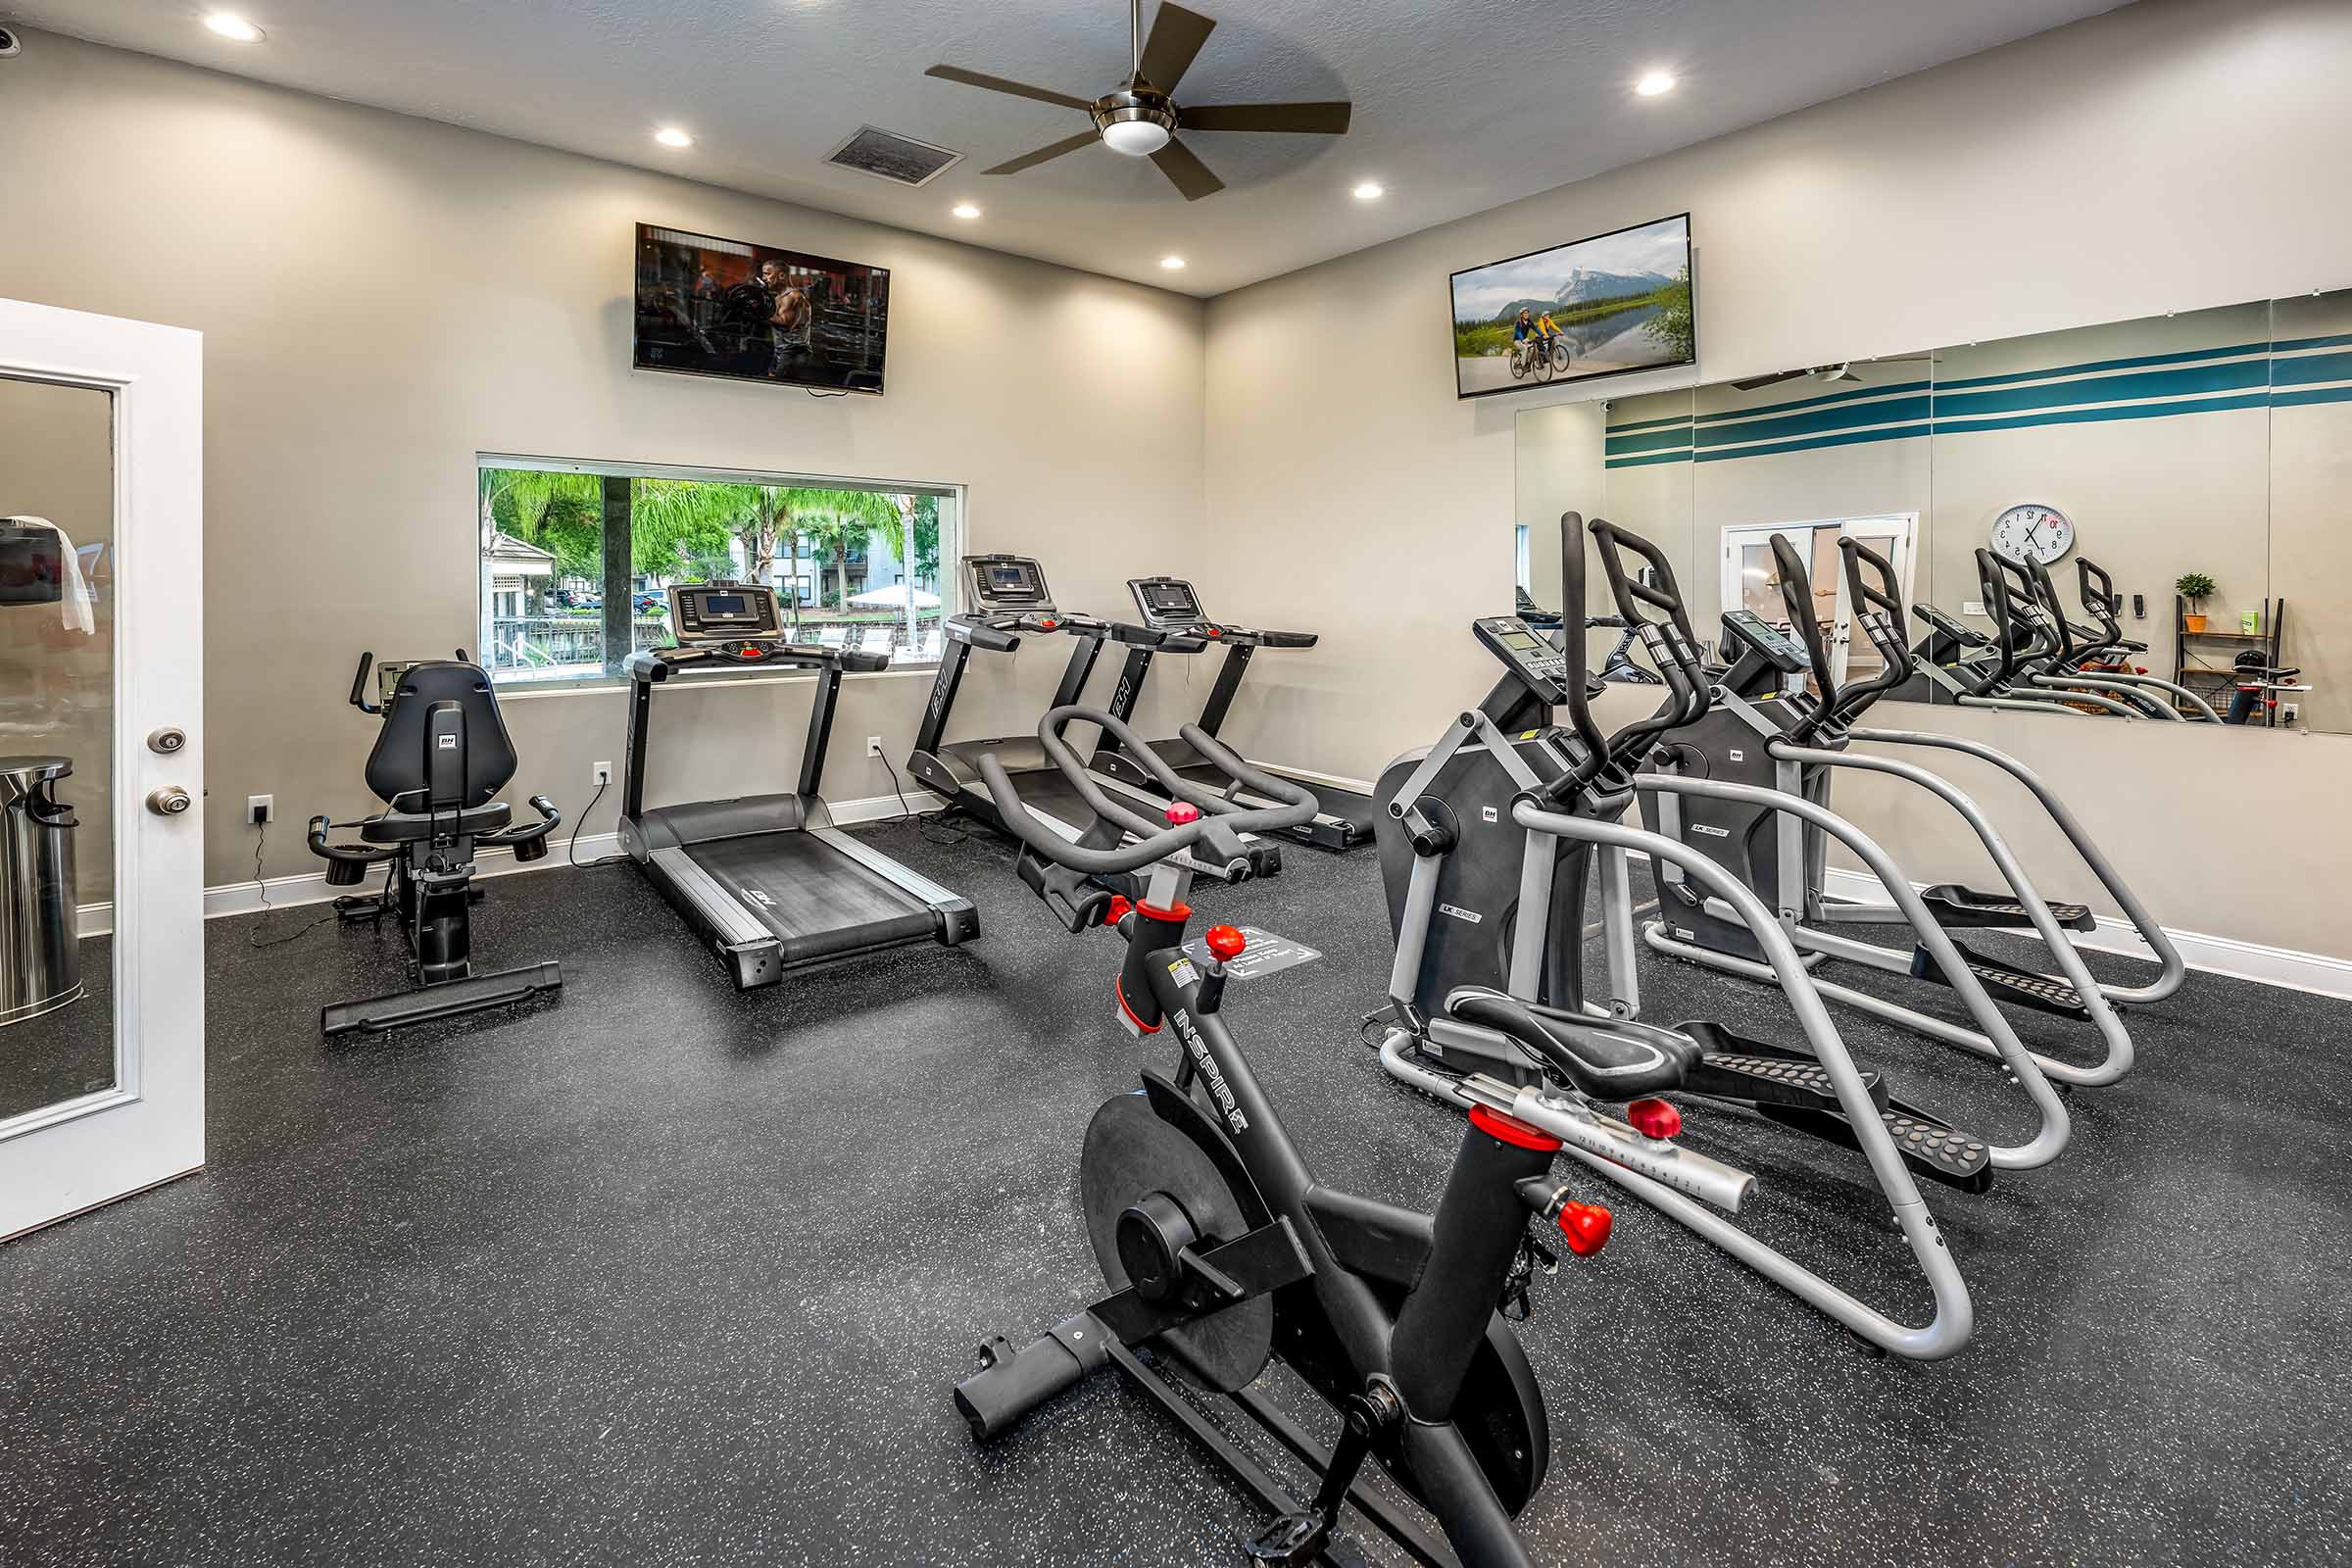 Fitness center with cardio equipment and weights at the Meridian